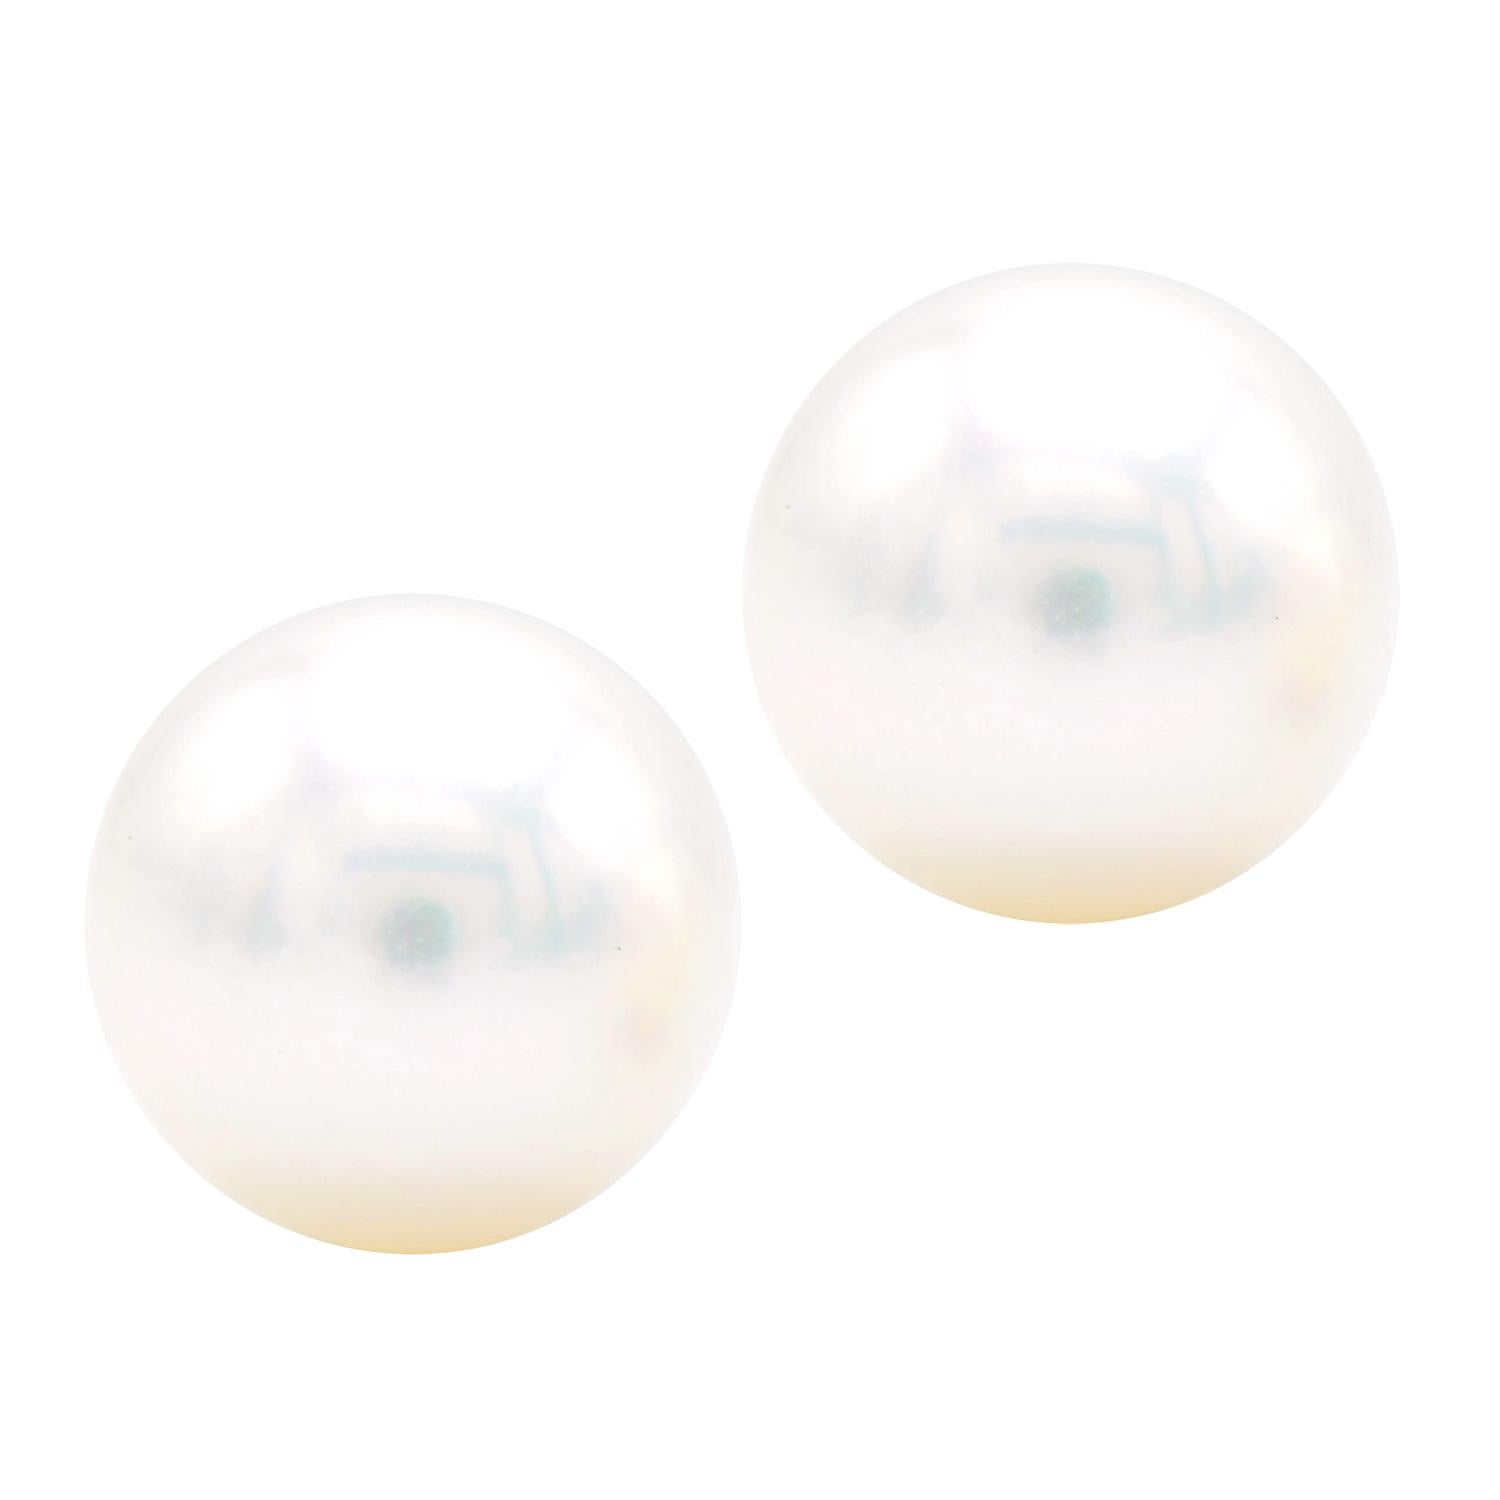 Cultured pearl stud earrings are the most classic and timeless piece of jewelry. They can be worn by anyone and everyone, making an excellent gift for all occasions. These 6.0-6.5mm cultured pearl earrings are perfectly matched and set in 14-karat